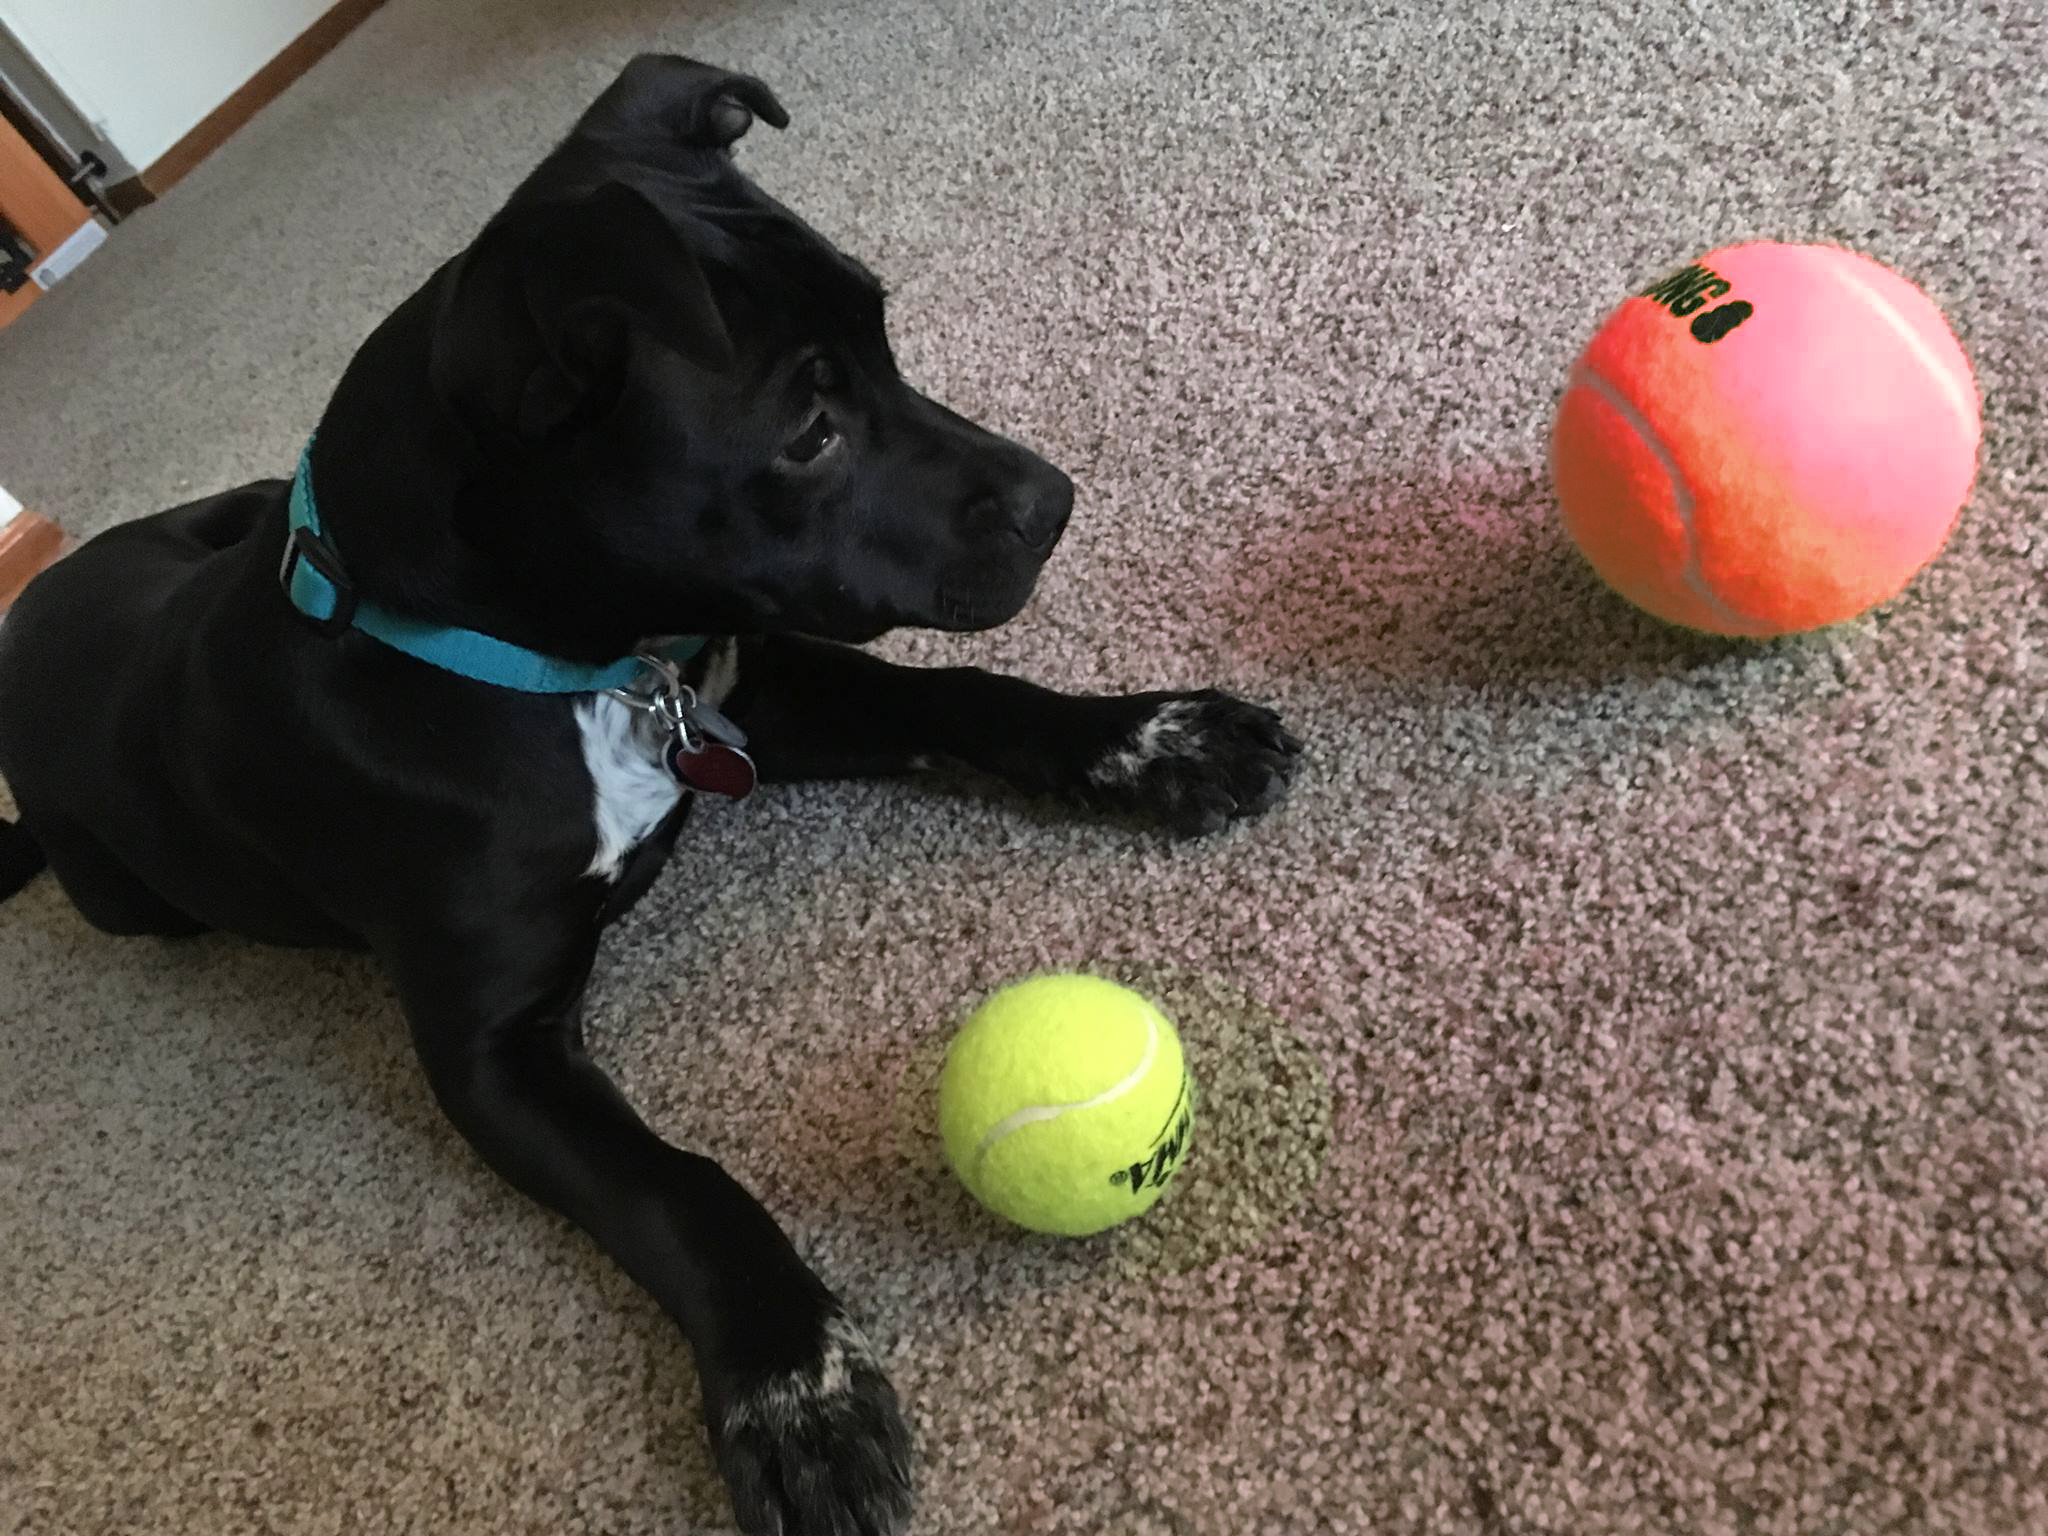 A small black dog looking at two tennis balls, one large and red and the other standard sized and yellow.